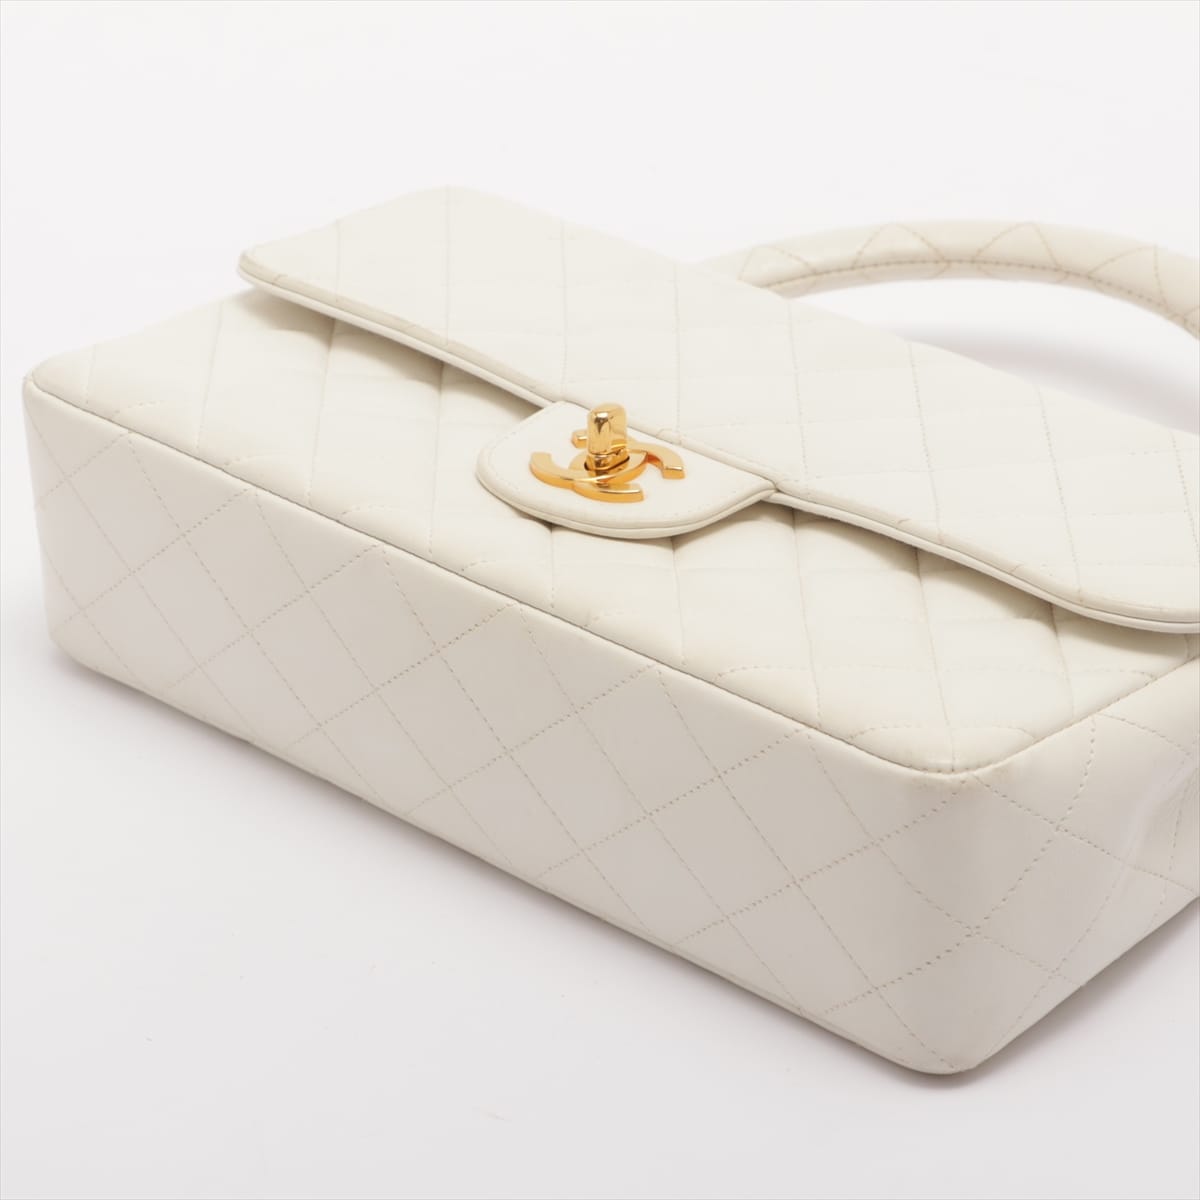 Chanel Matelasse Lambskin Hand bag Parent-child bag White Gold Metal fittings 4XXXXXX Parent only